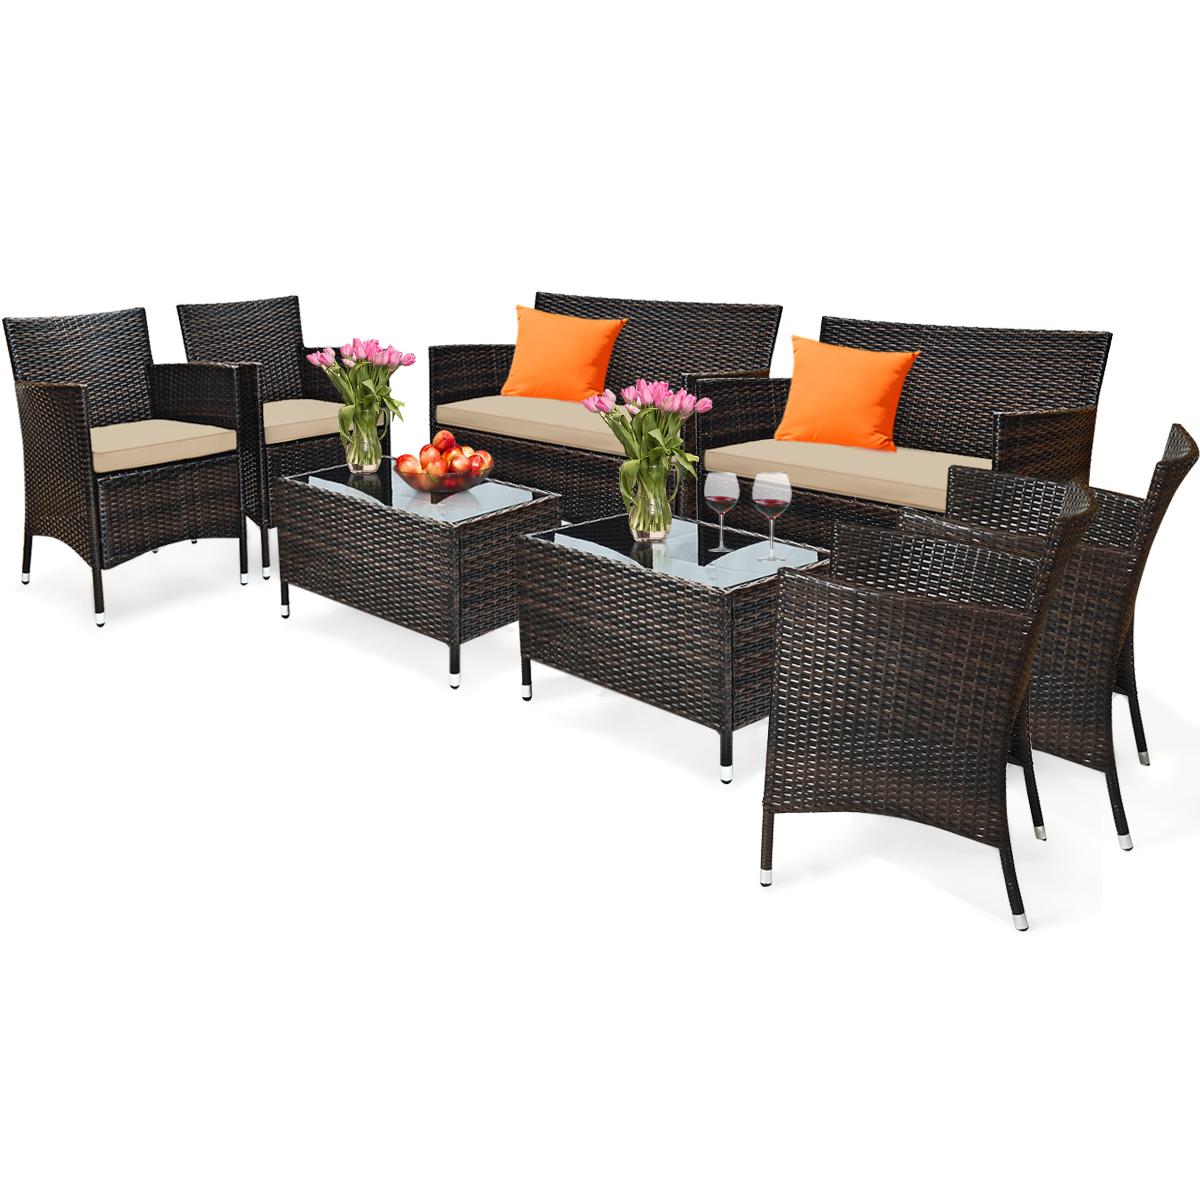 Gymax 8PCS Patio Rattan Outdoor Furniture Set w/ Cushioned Chair Loveseat Table - image 1 of 10